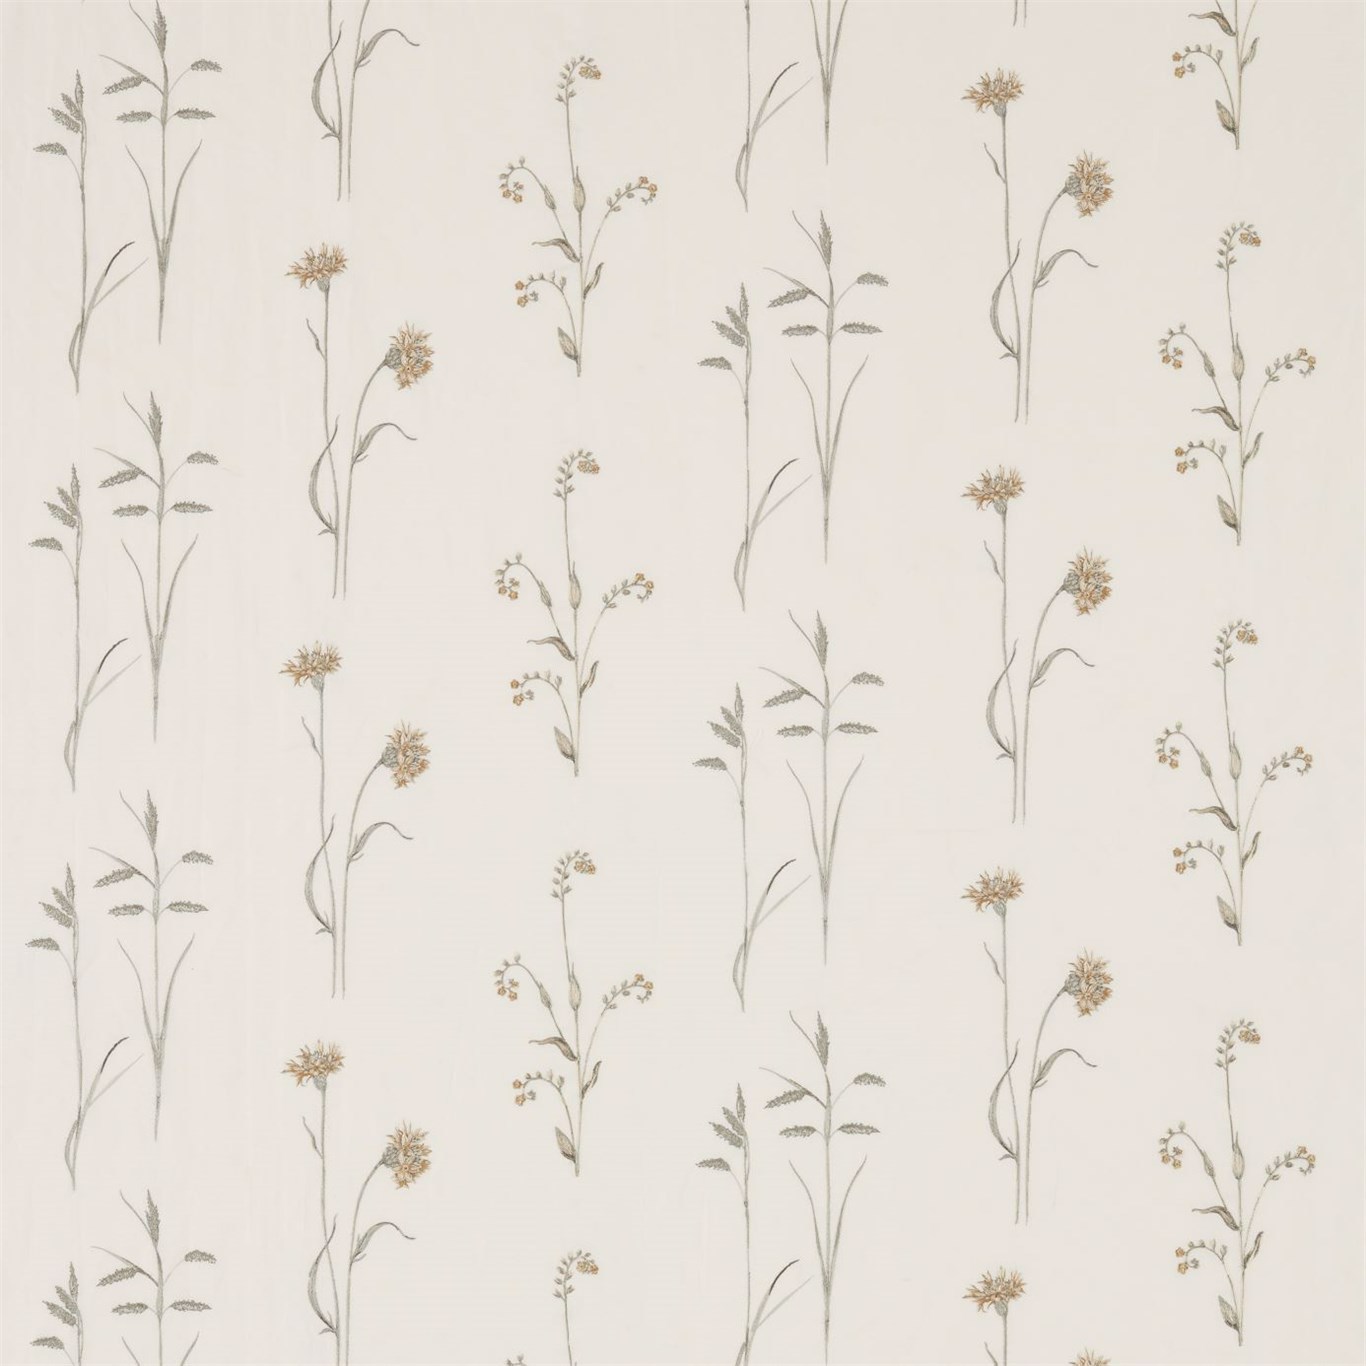 Meadow Grasses Sage/Honey Fabric by SAN